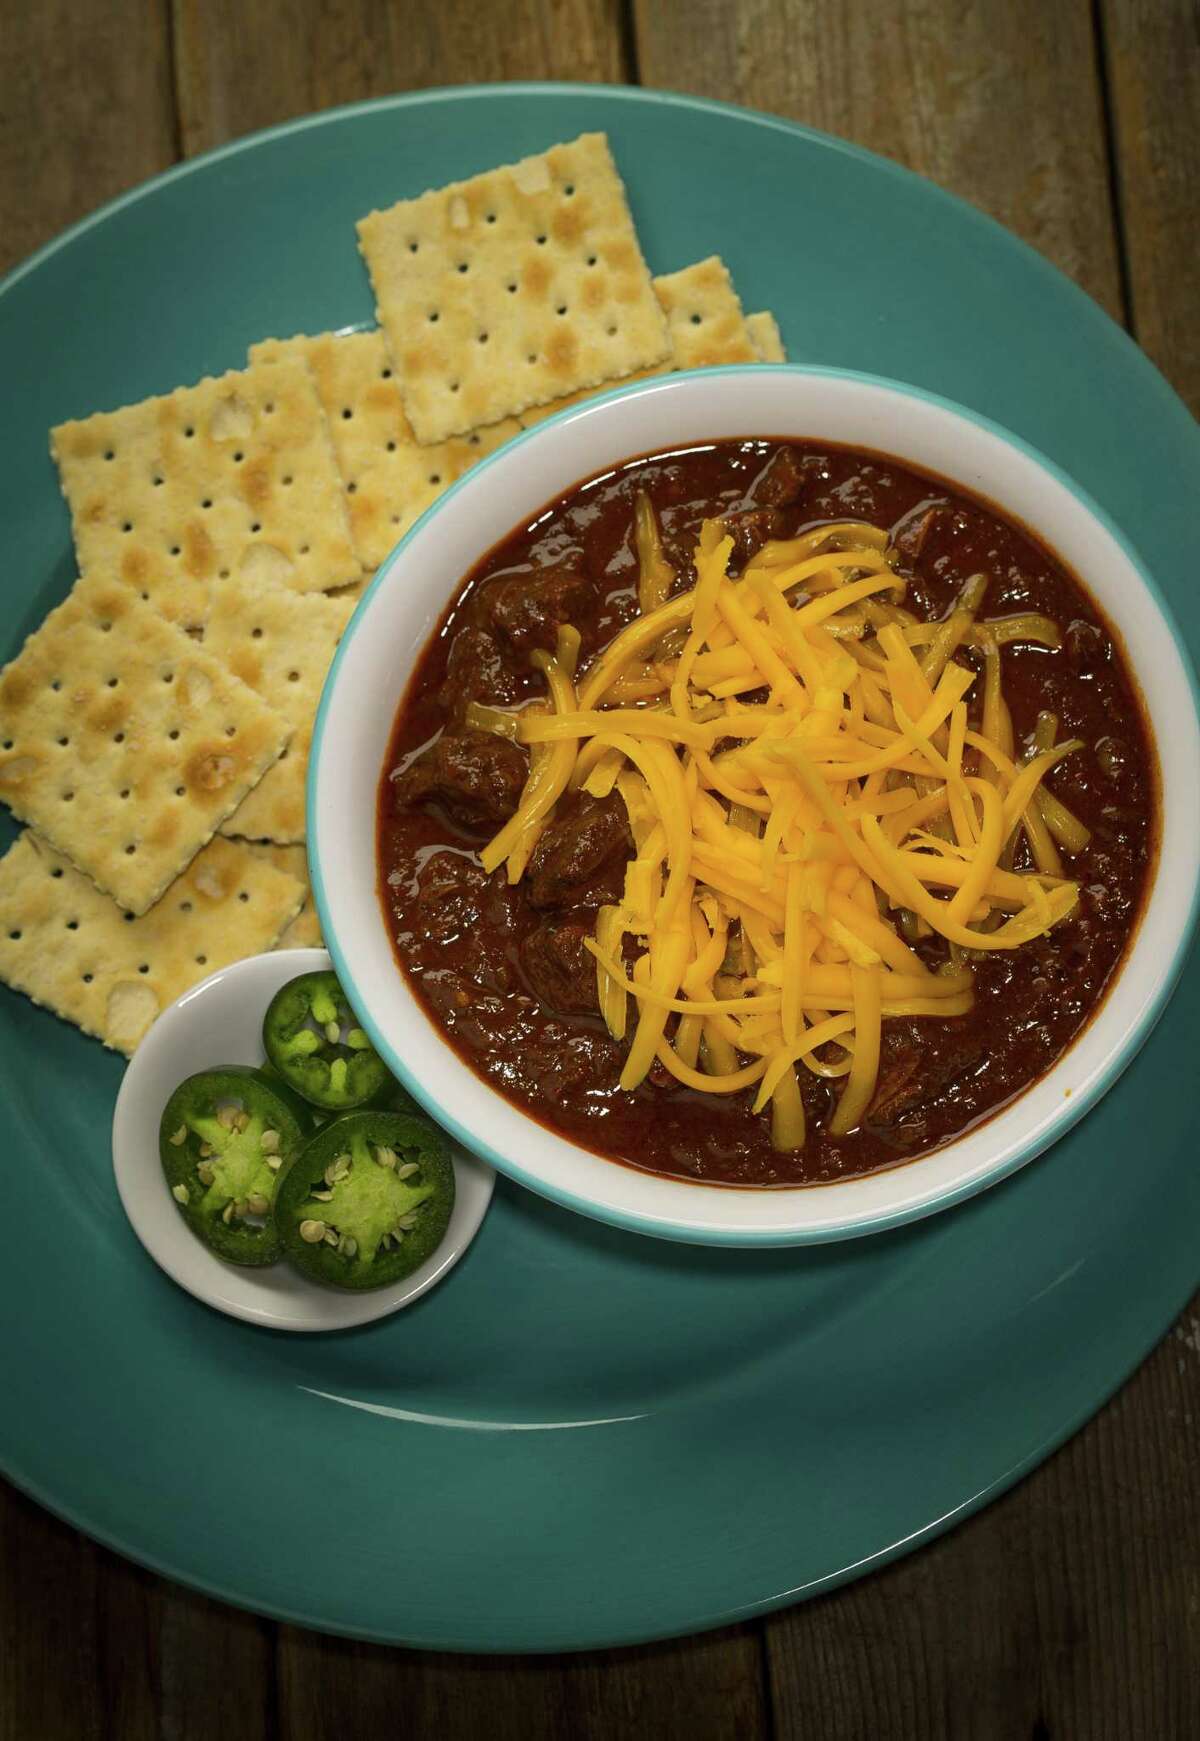 Seven-Chile Texas Chili from "The Homesick Texan Cookbook" by Lisa Fain is made using chuck roast simmered in a dried chile paste and plenty of spices including cinnamon, clove and allspice as well as brewed coffee and beer.